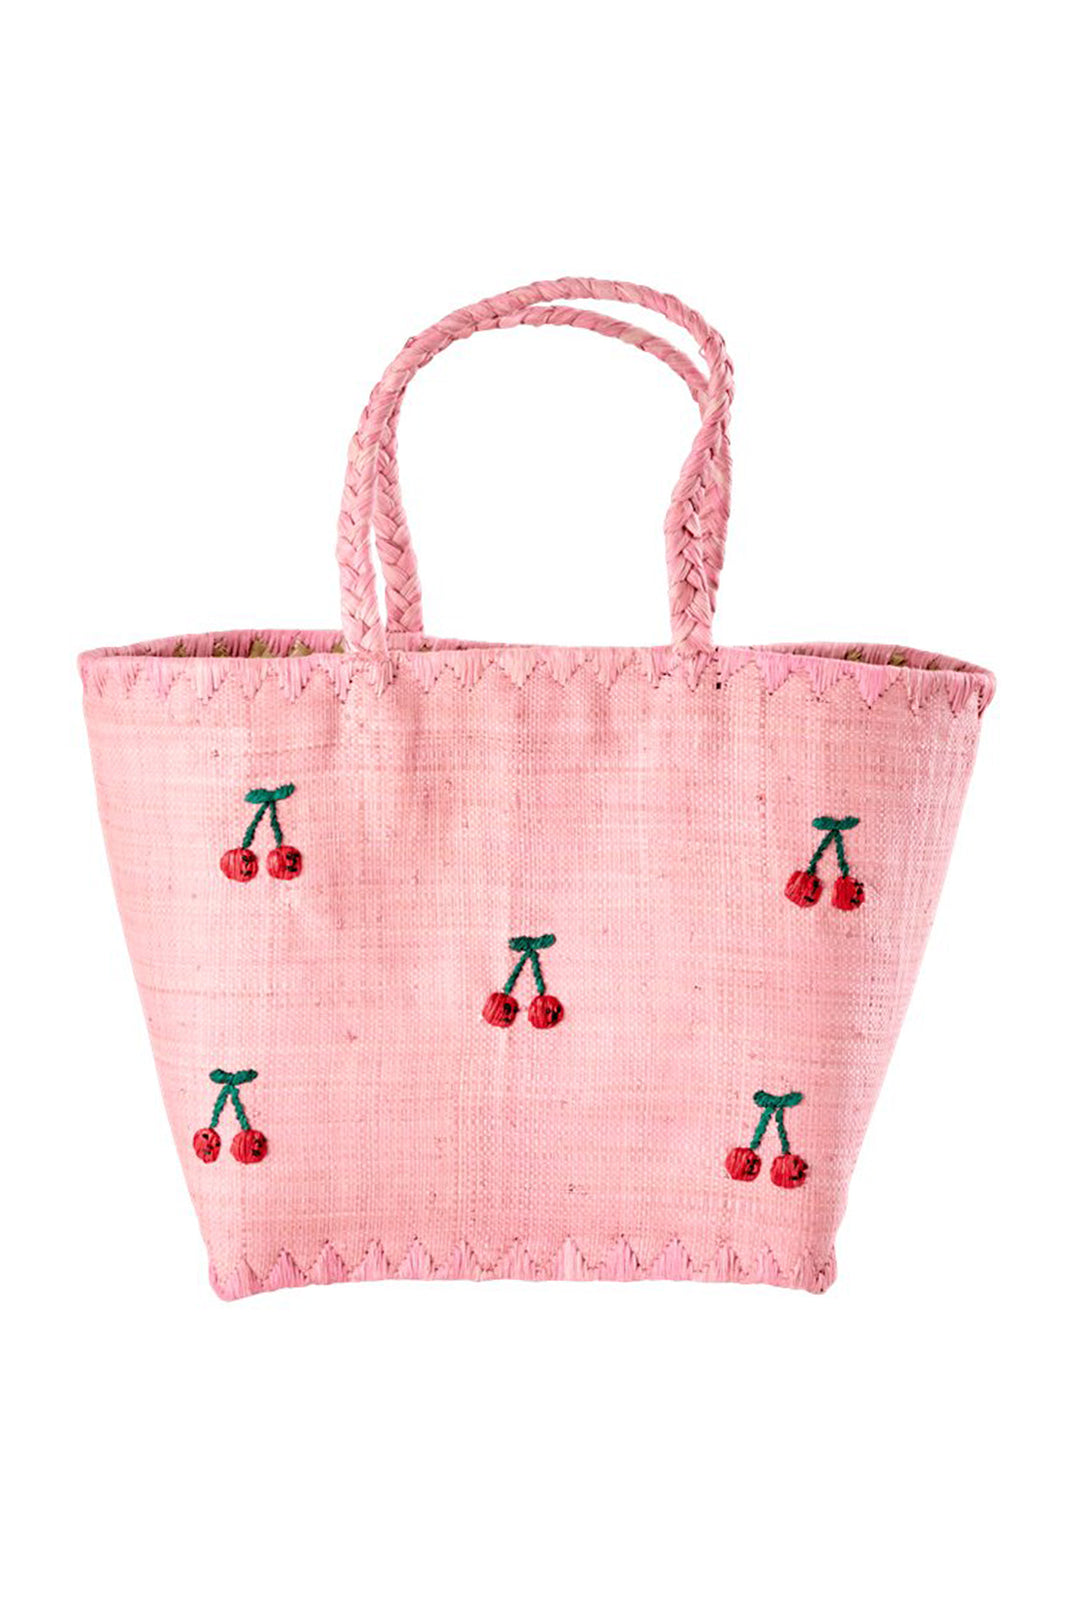 Pink Raffia Bag with Red Cherries